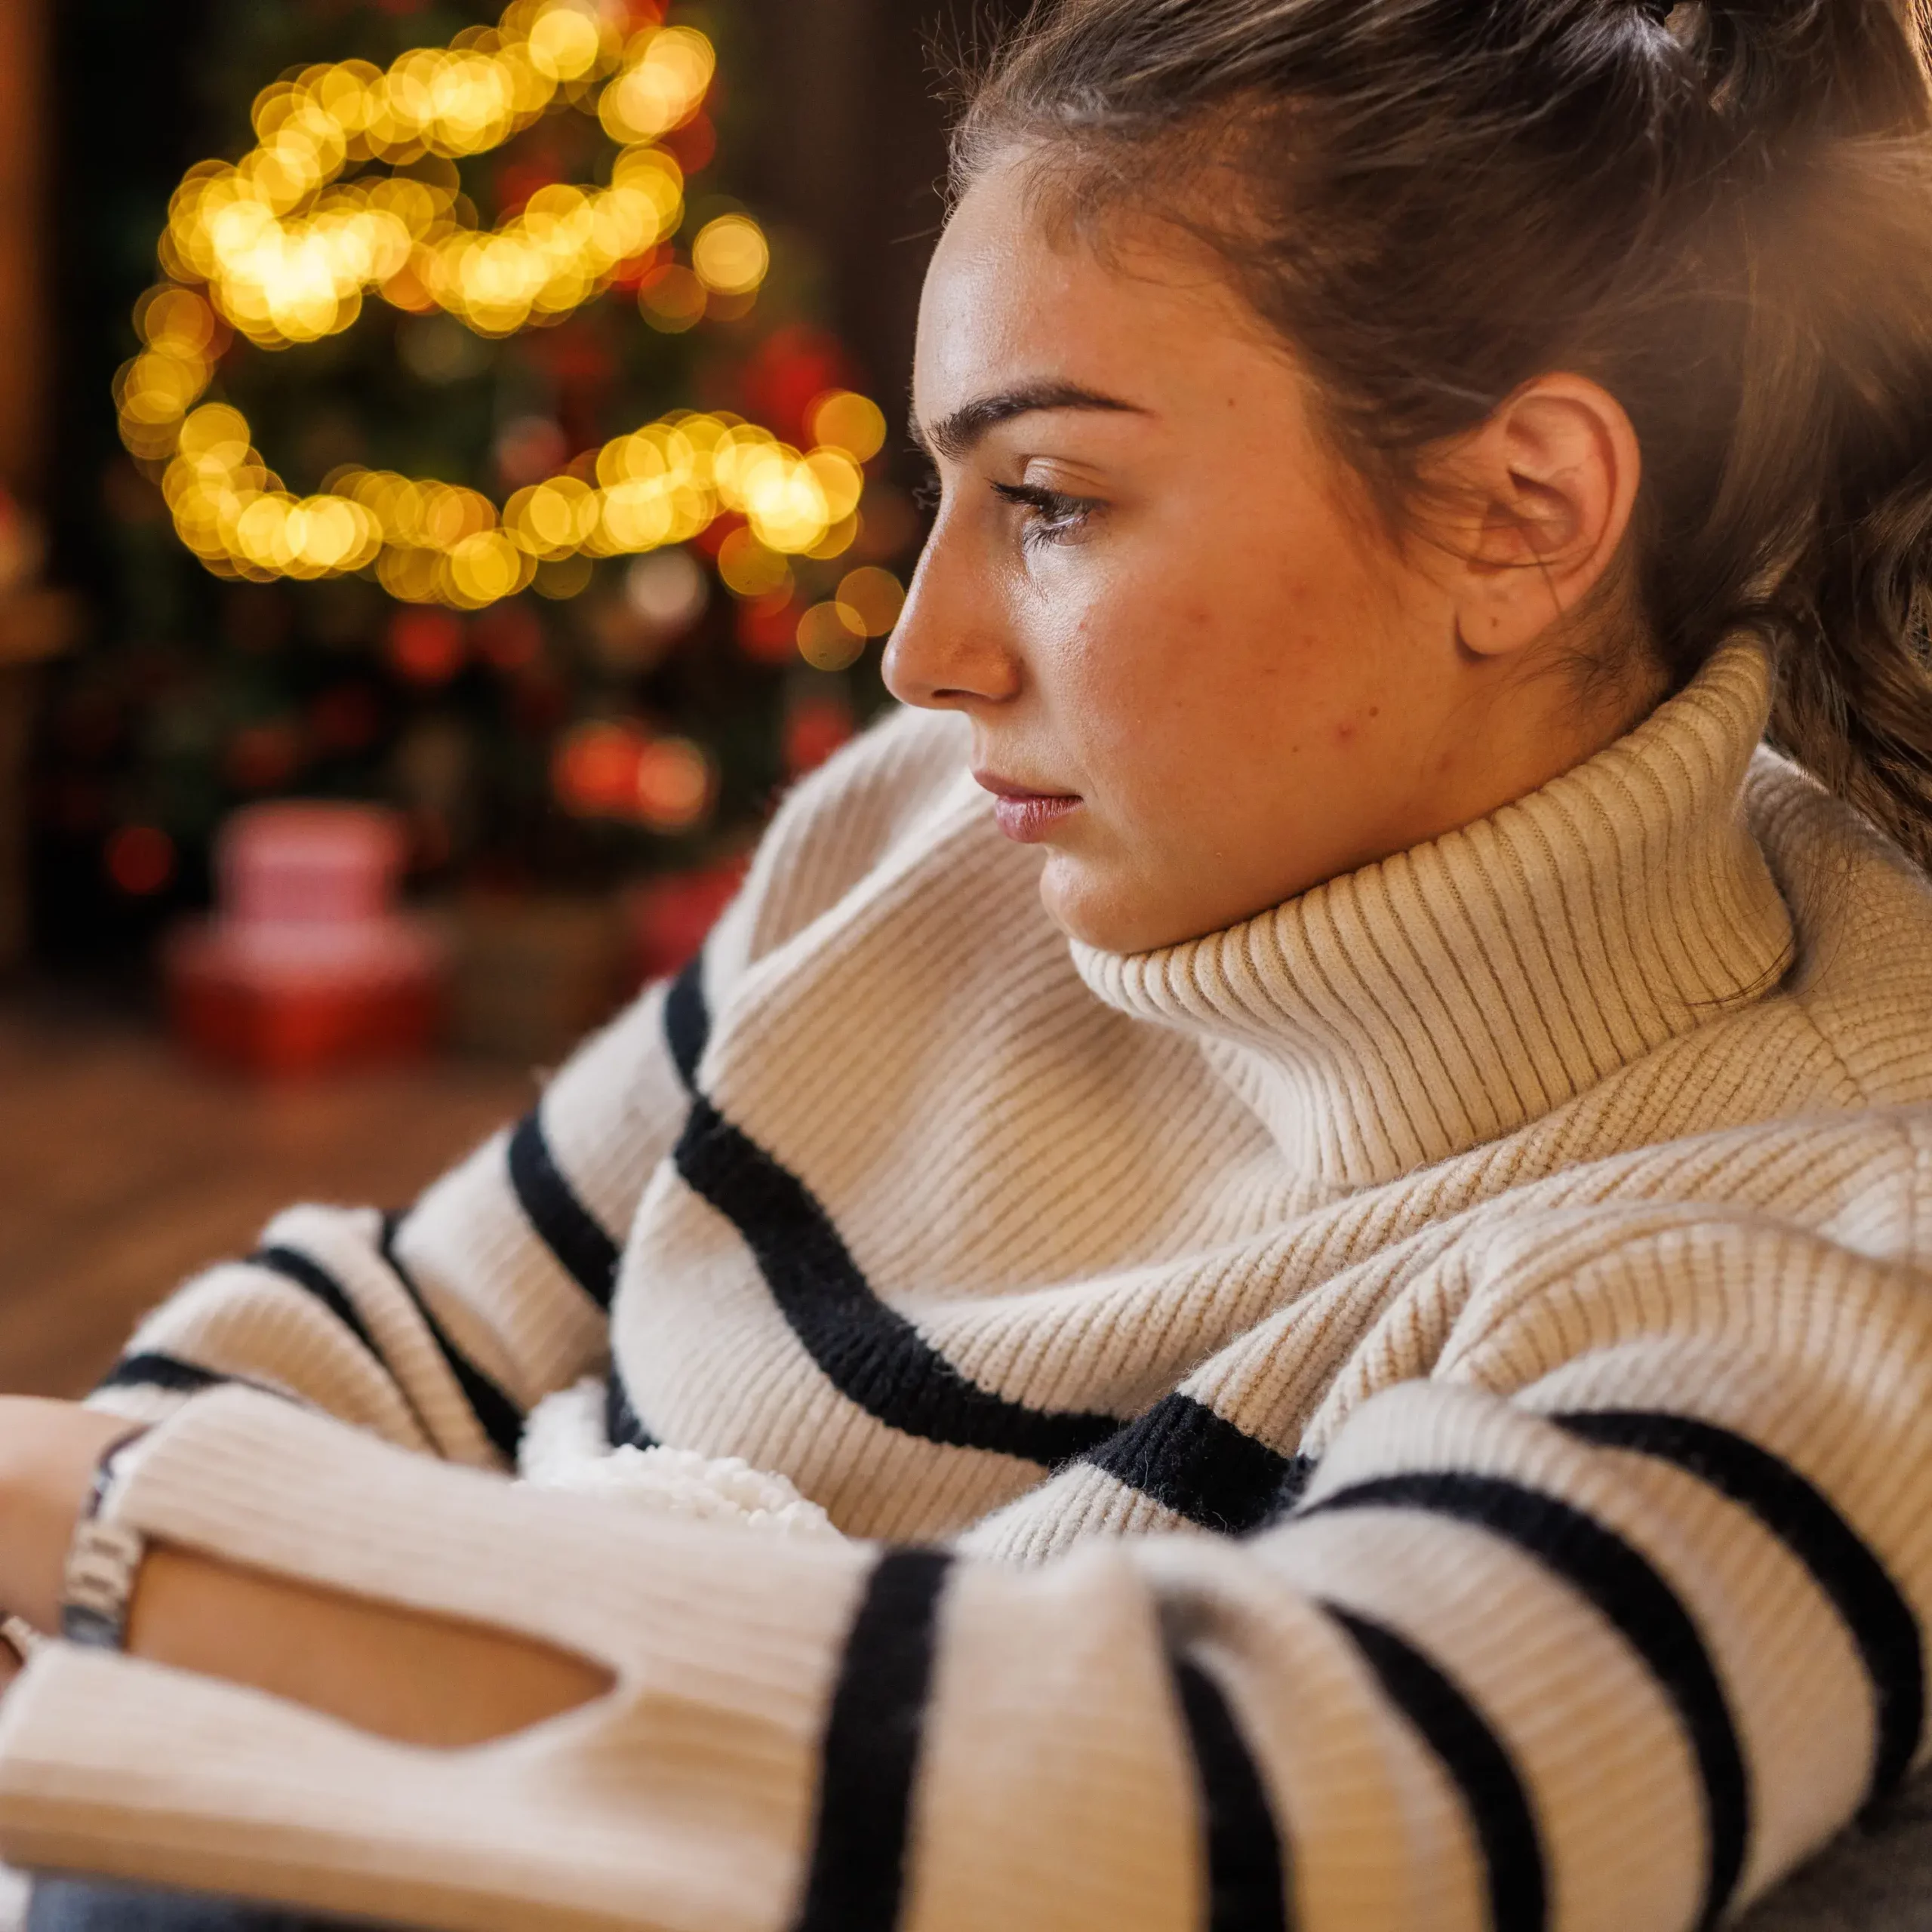 coping with depression and anxiety during the holidays